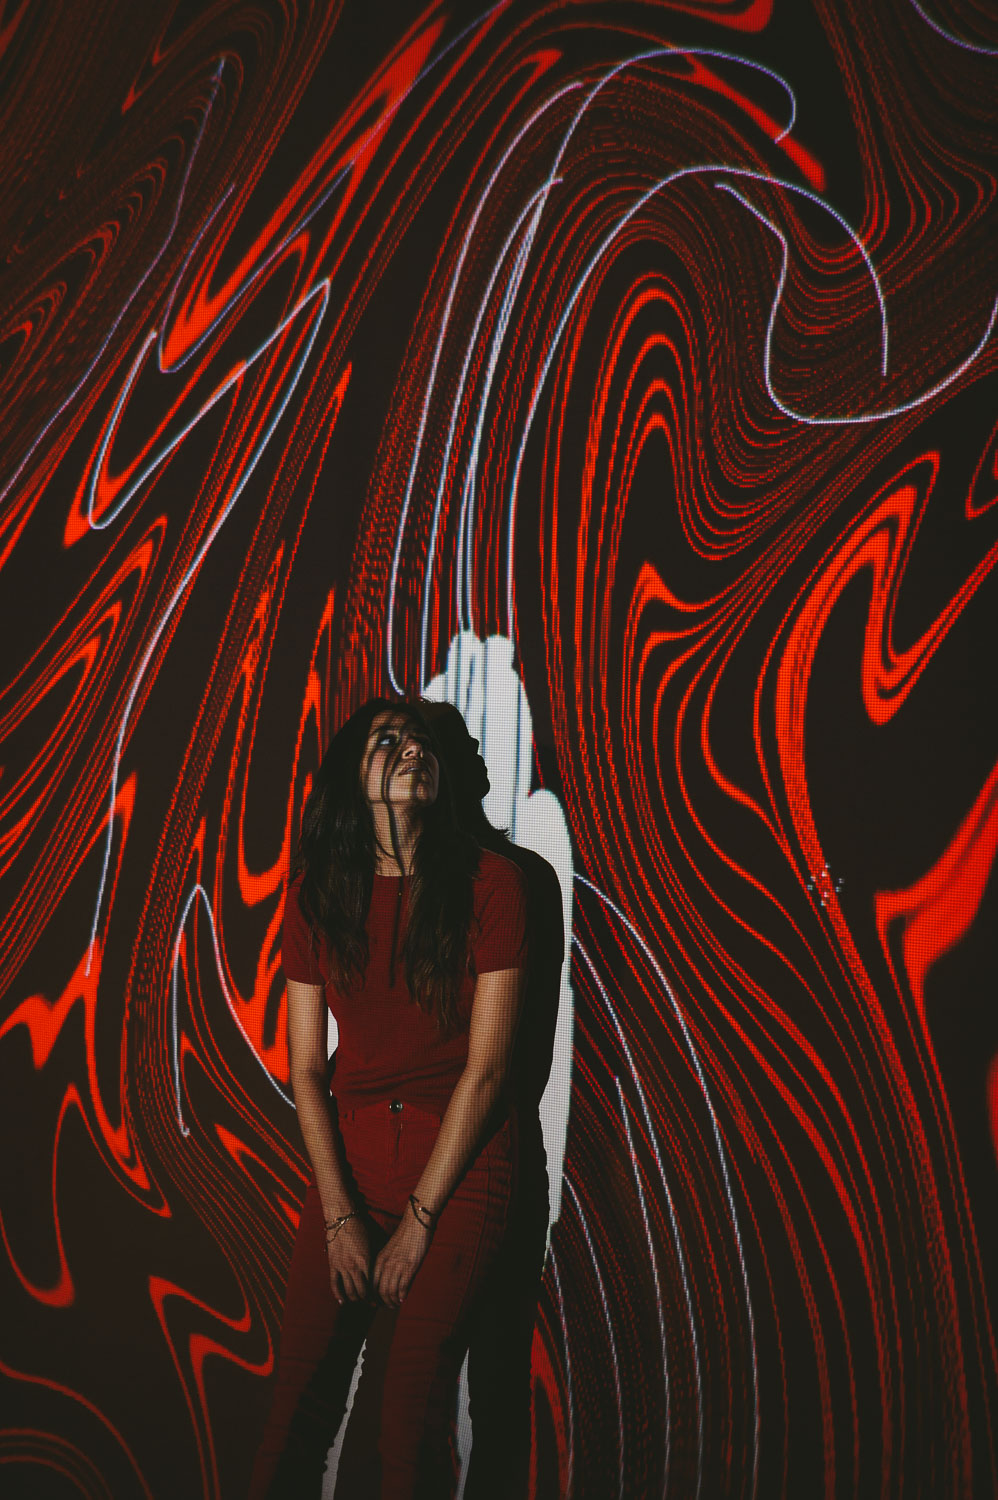 Artwalk self projection live art exhibit by C&I Studios with woman with long black hair in front of red artwork looking up